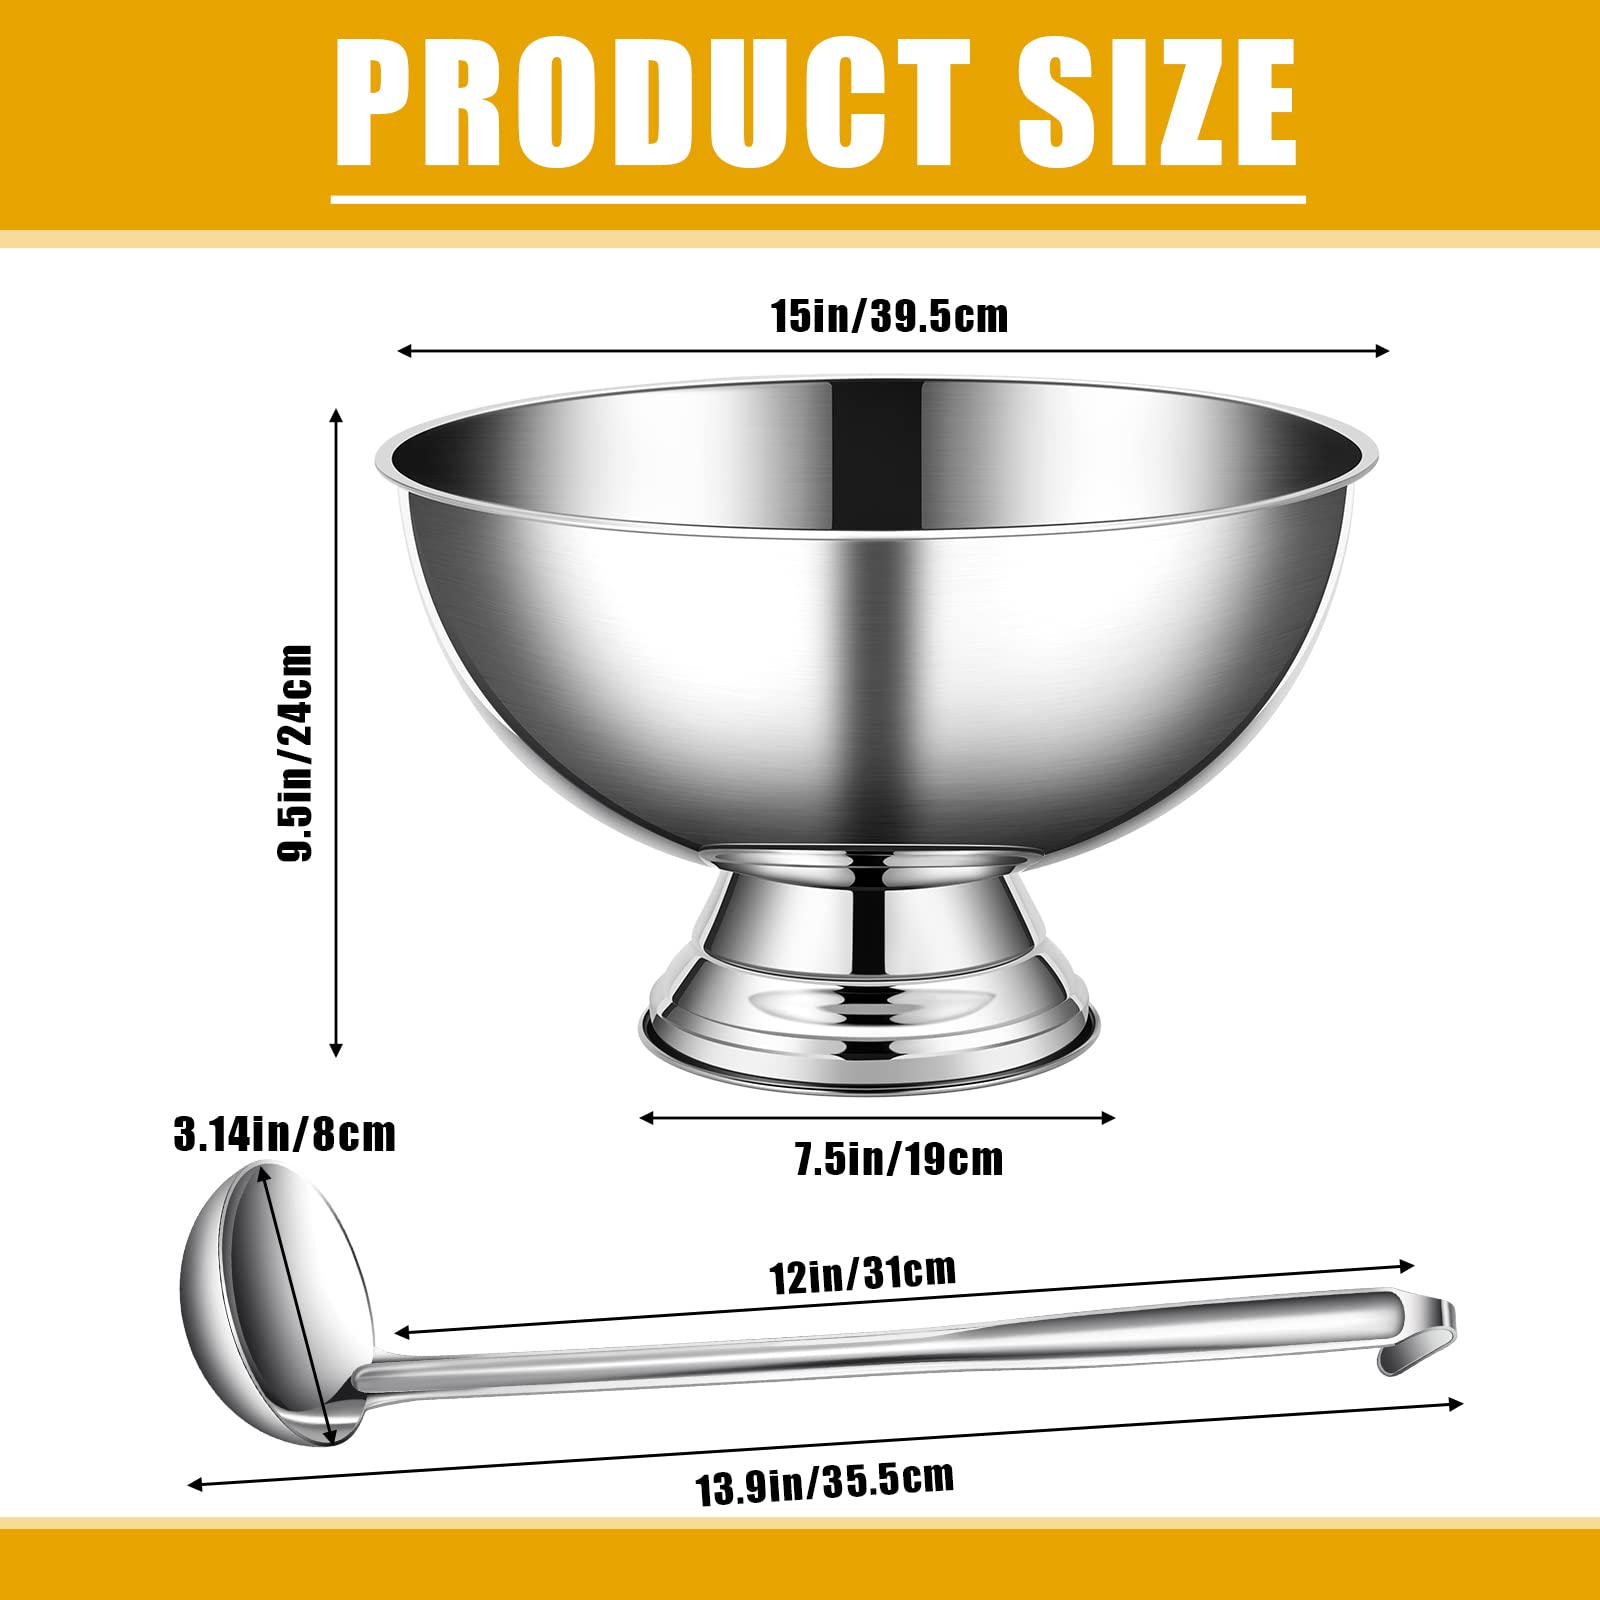 Geetery 3 Gallon 12L Stainless Steel Champagne Bucket Punch Bowl with Ladle Ice Bucket for Parties Metal Wine Bowl with Base Large Size Ice Bowl for Wine Beer Home Bar Parties